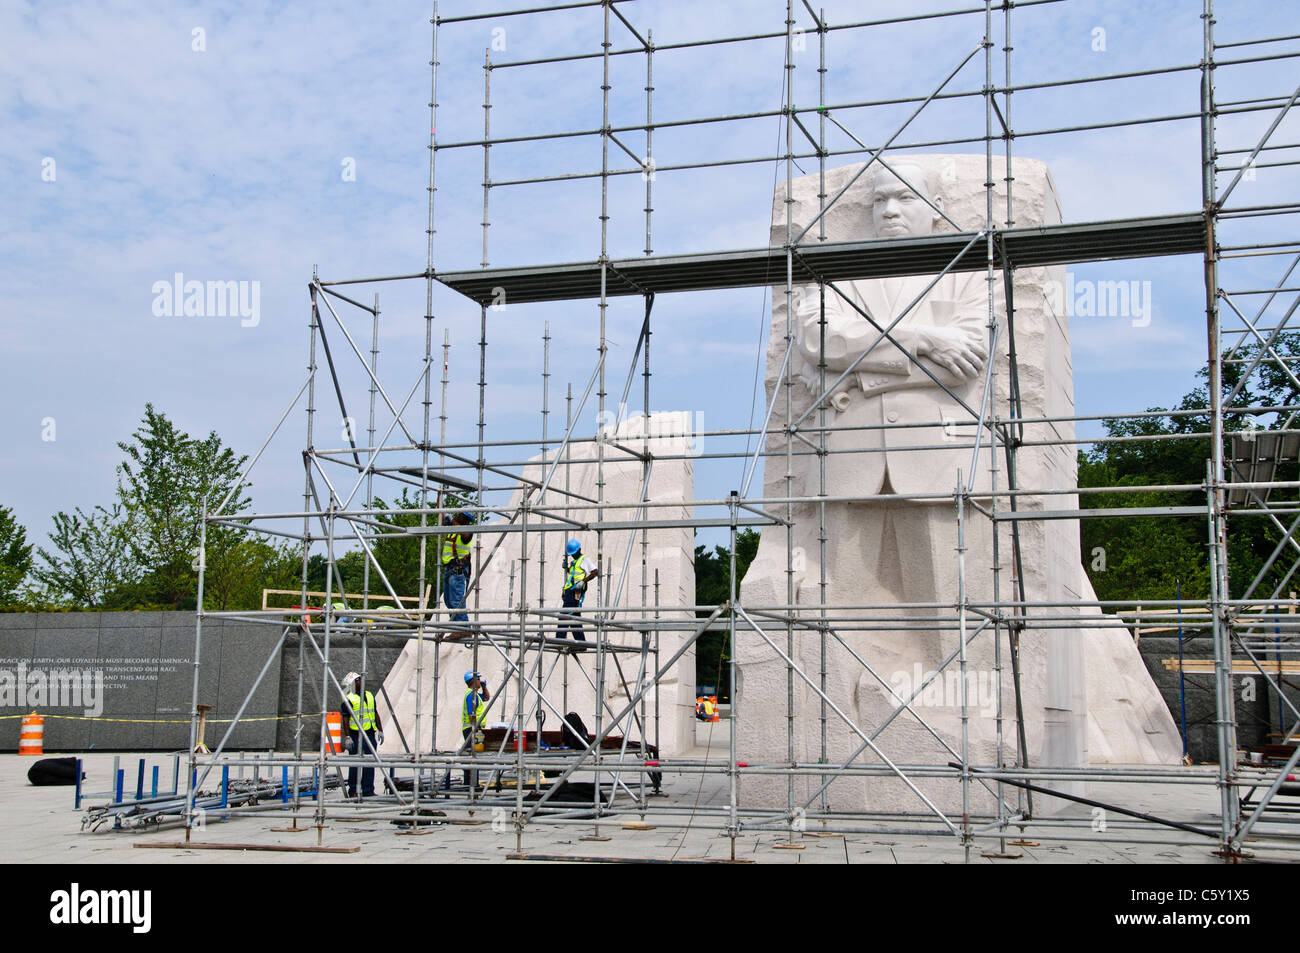 WASHINGTON DC, USA - Scaffolding being dismantled in preparation for the dedication of the Martin Luther King Memorial in Washington DC. Stock Photo